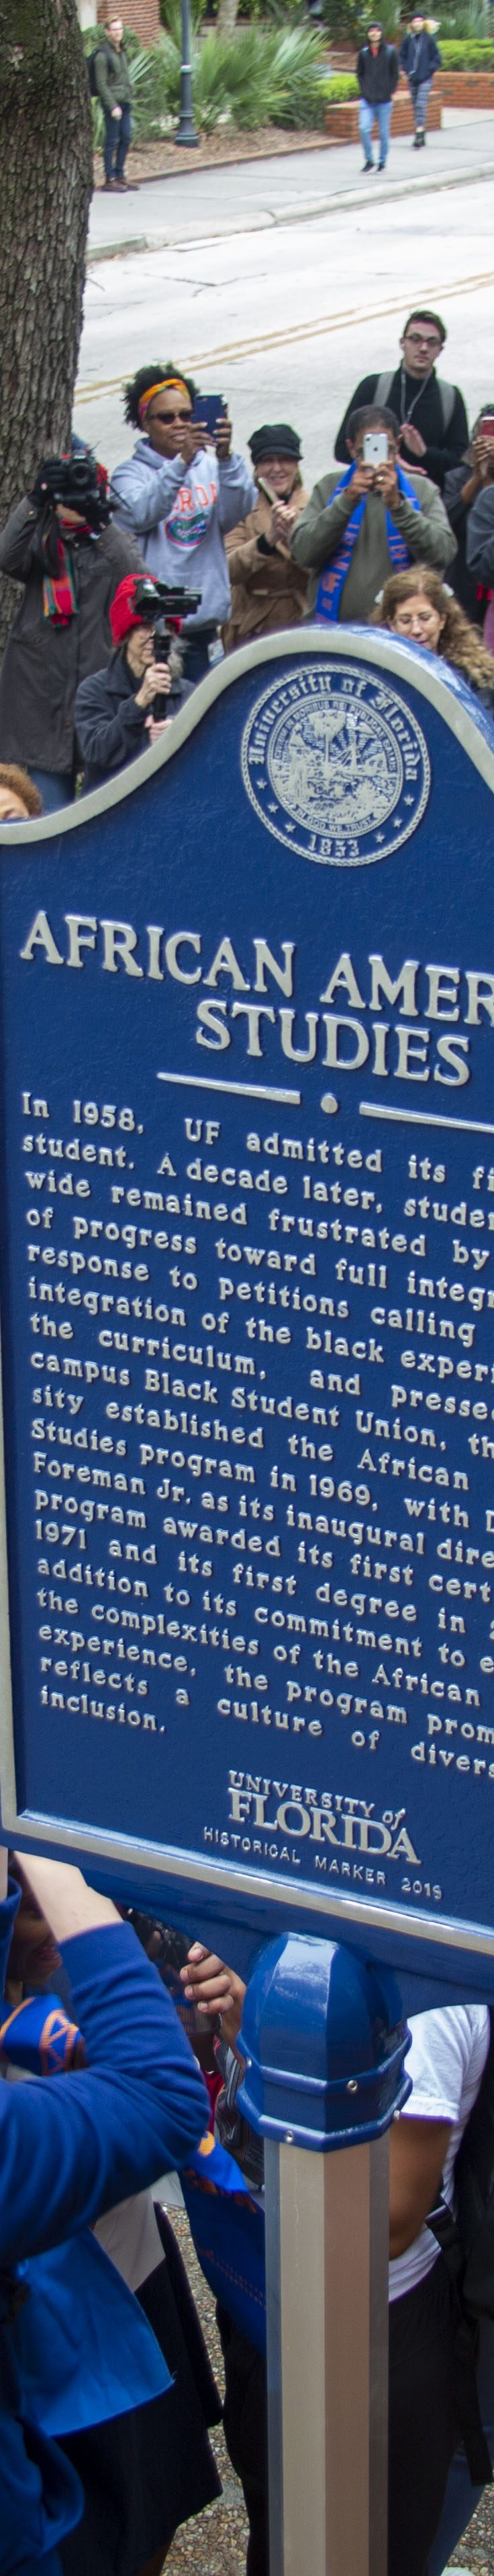 Celebrating 50 Years of African American Studies at UF